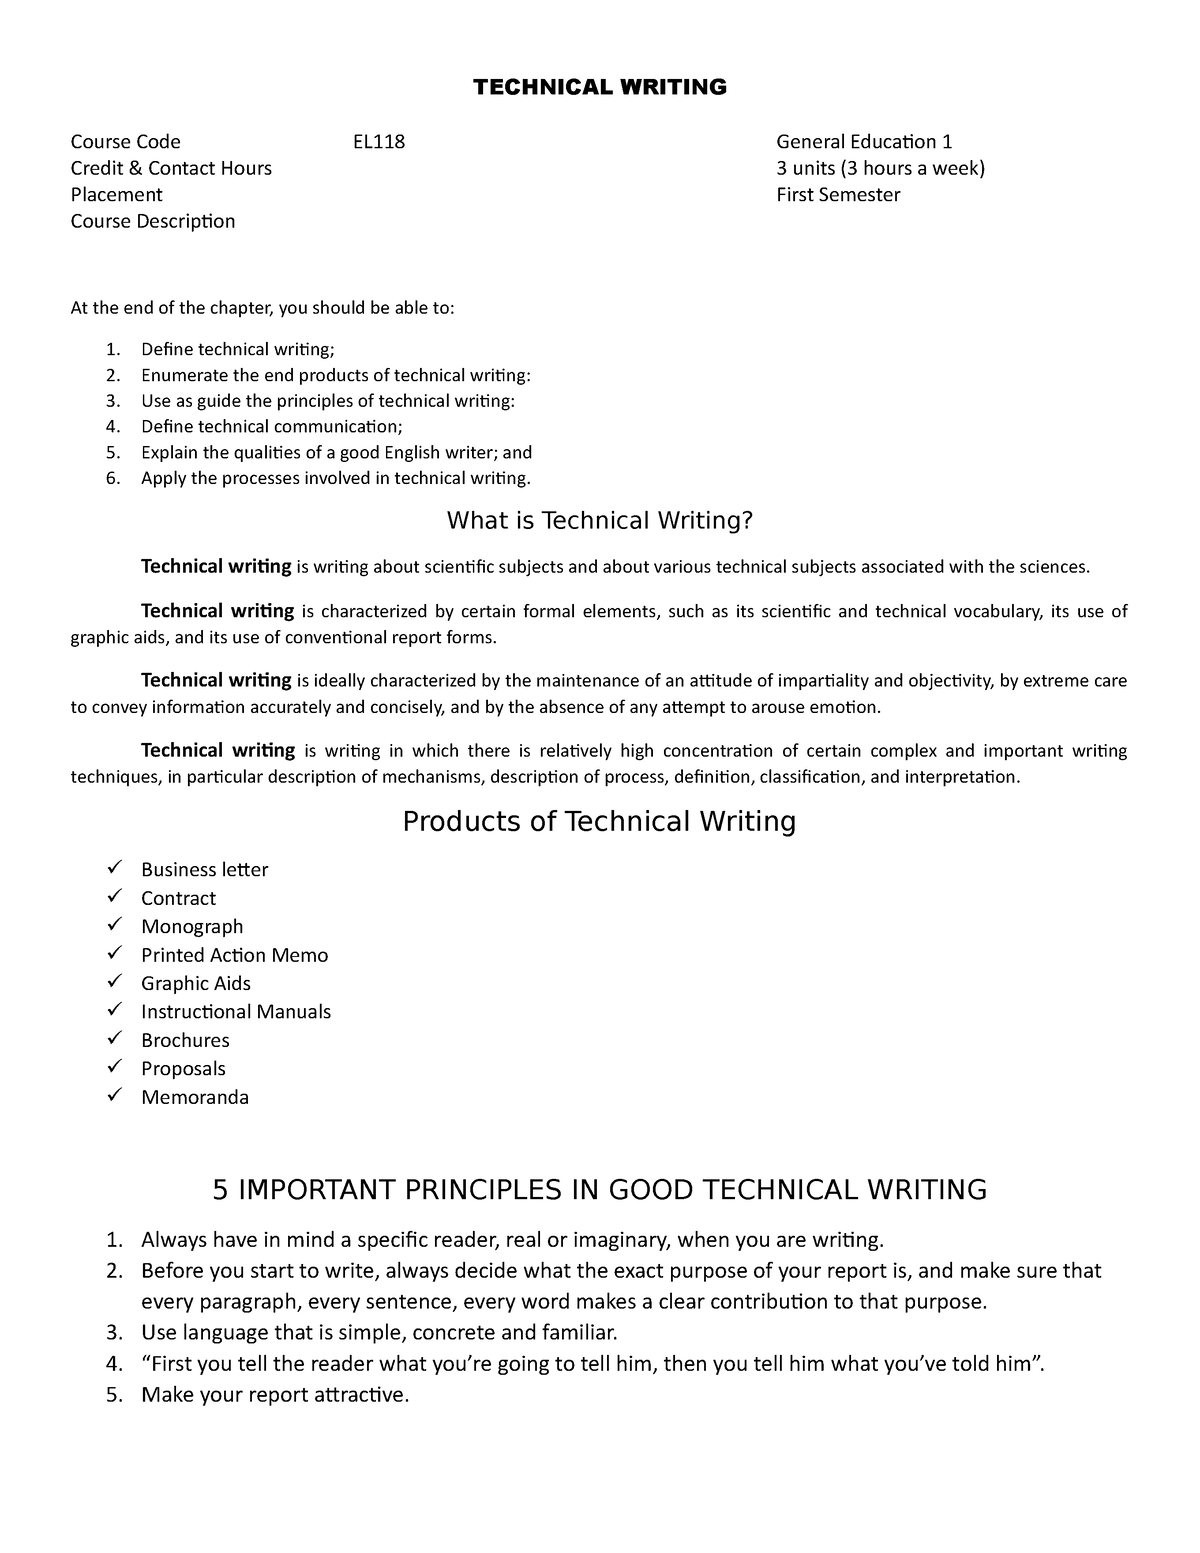 end products of technical writing